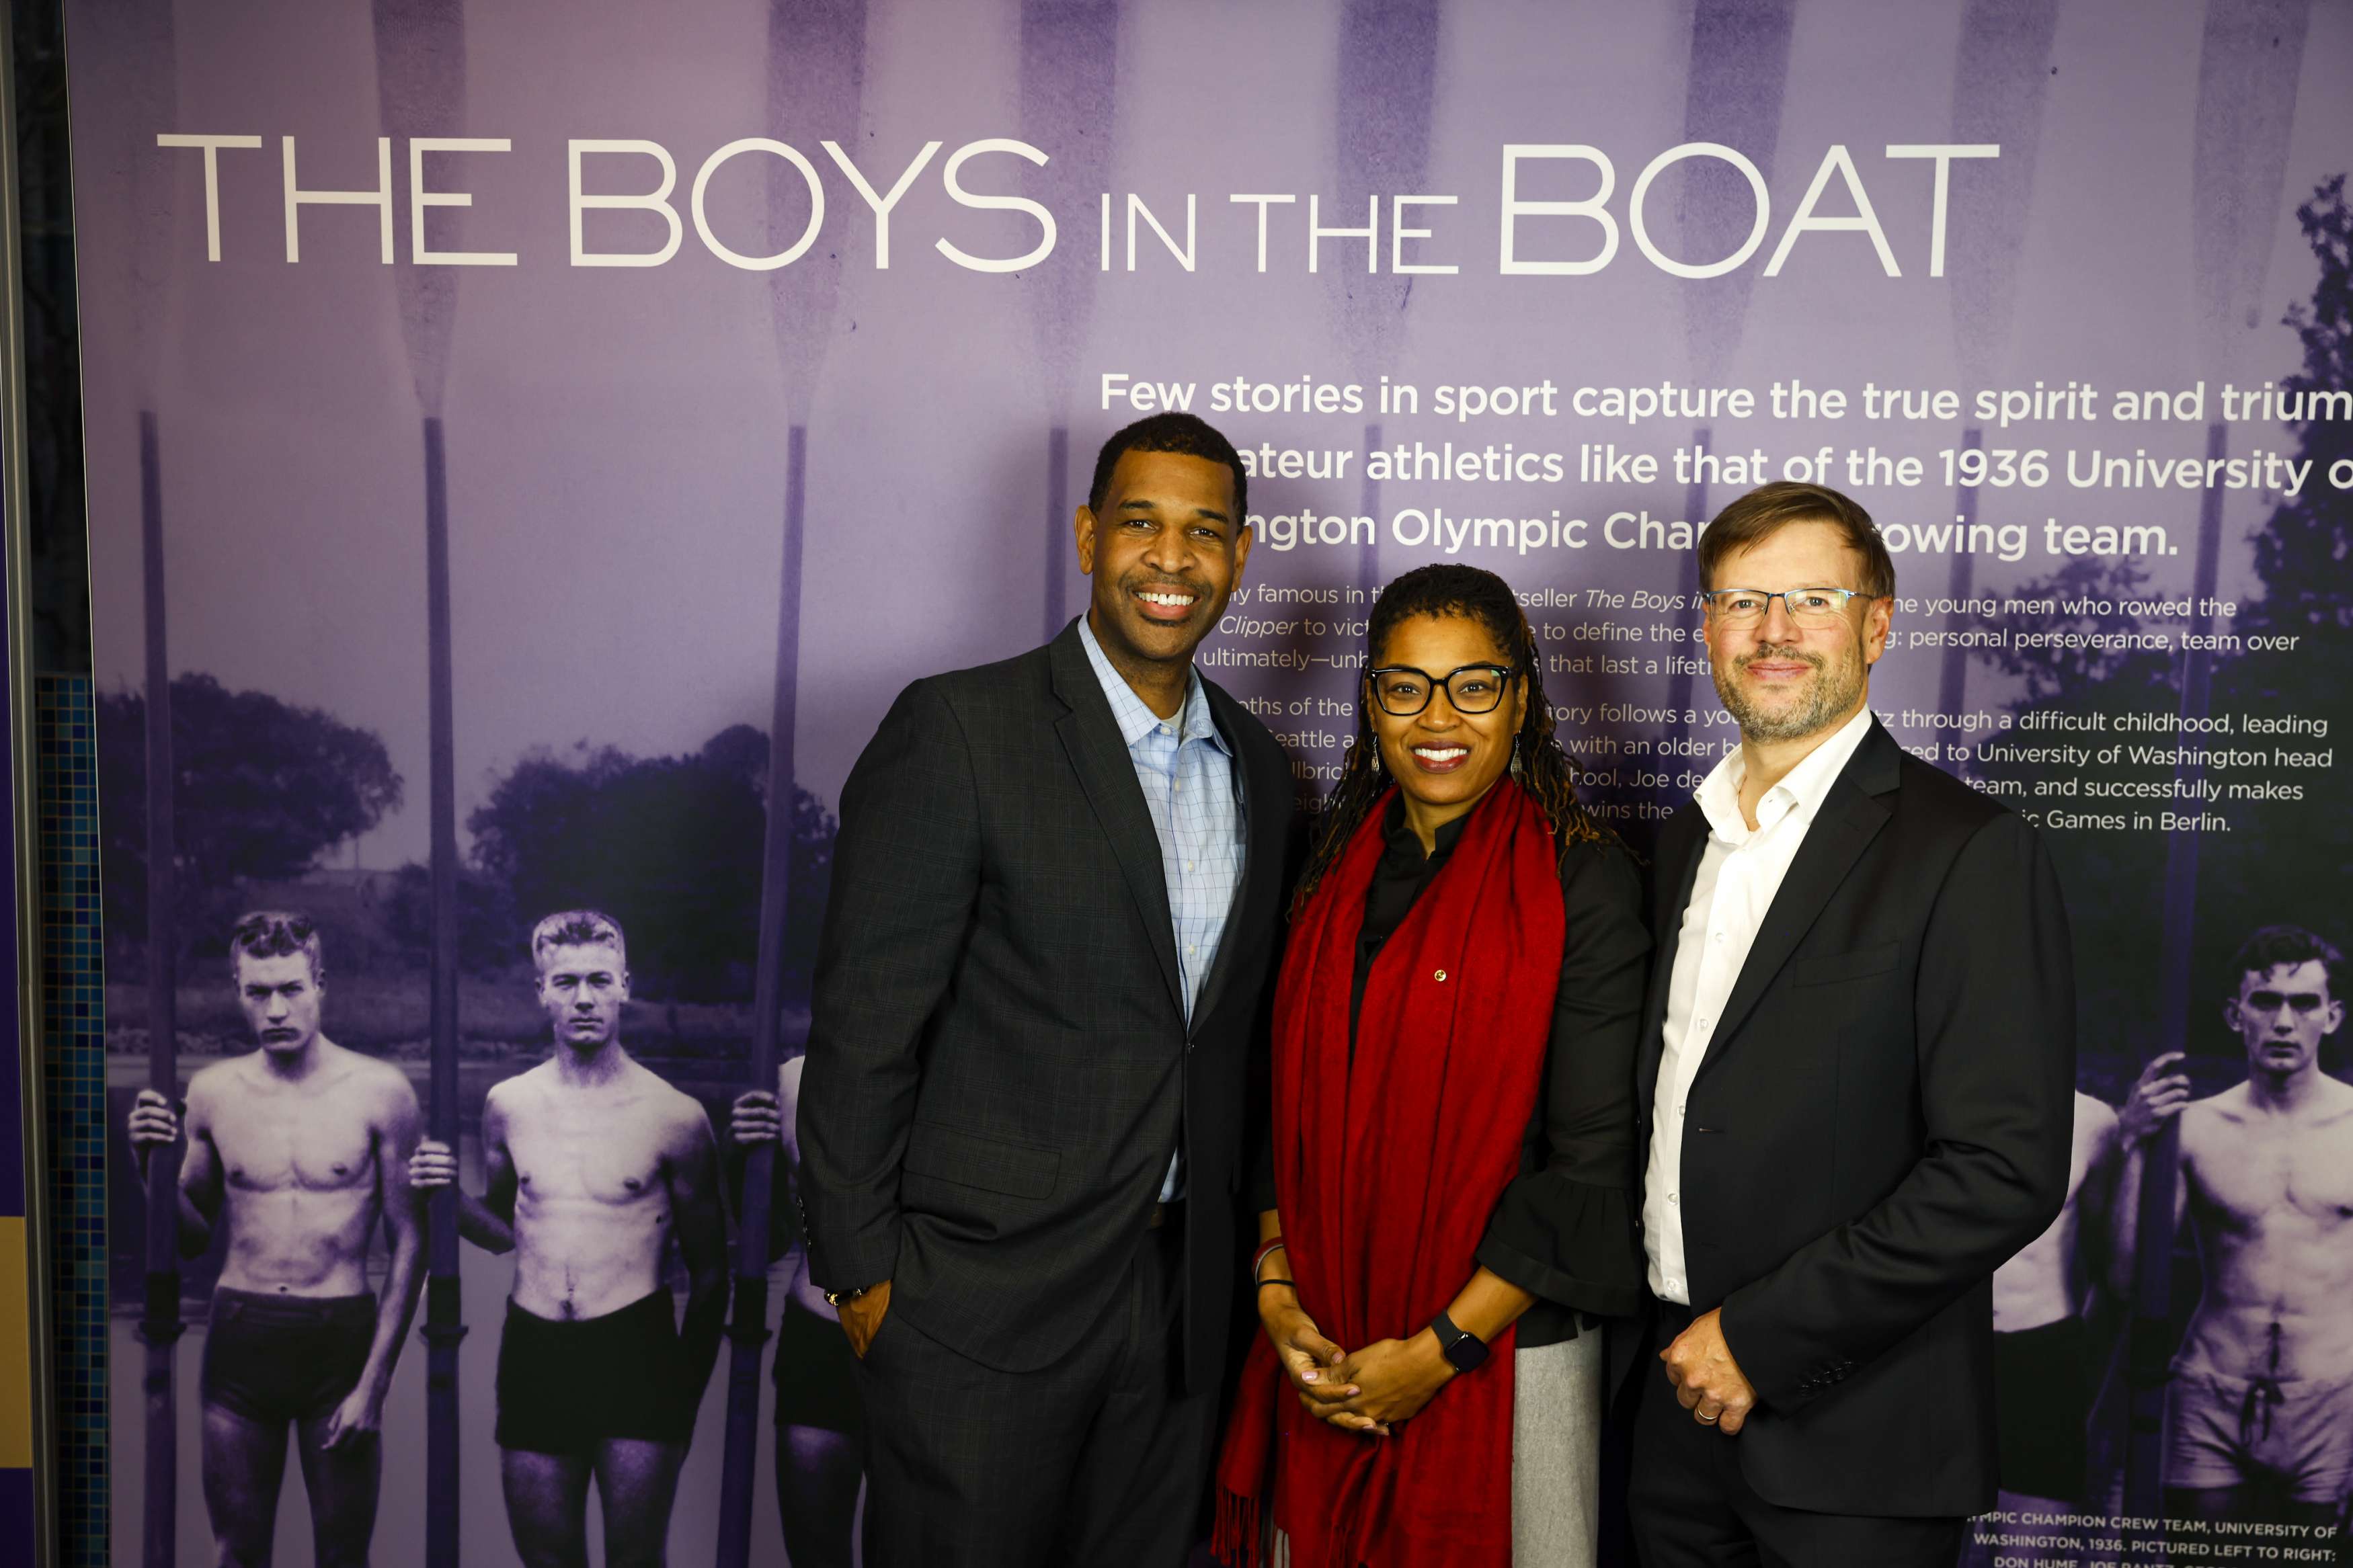 Three individuals pose in front of a sign that says "The Boys in the Boat" at the University of Washington